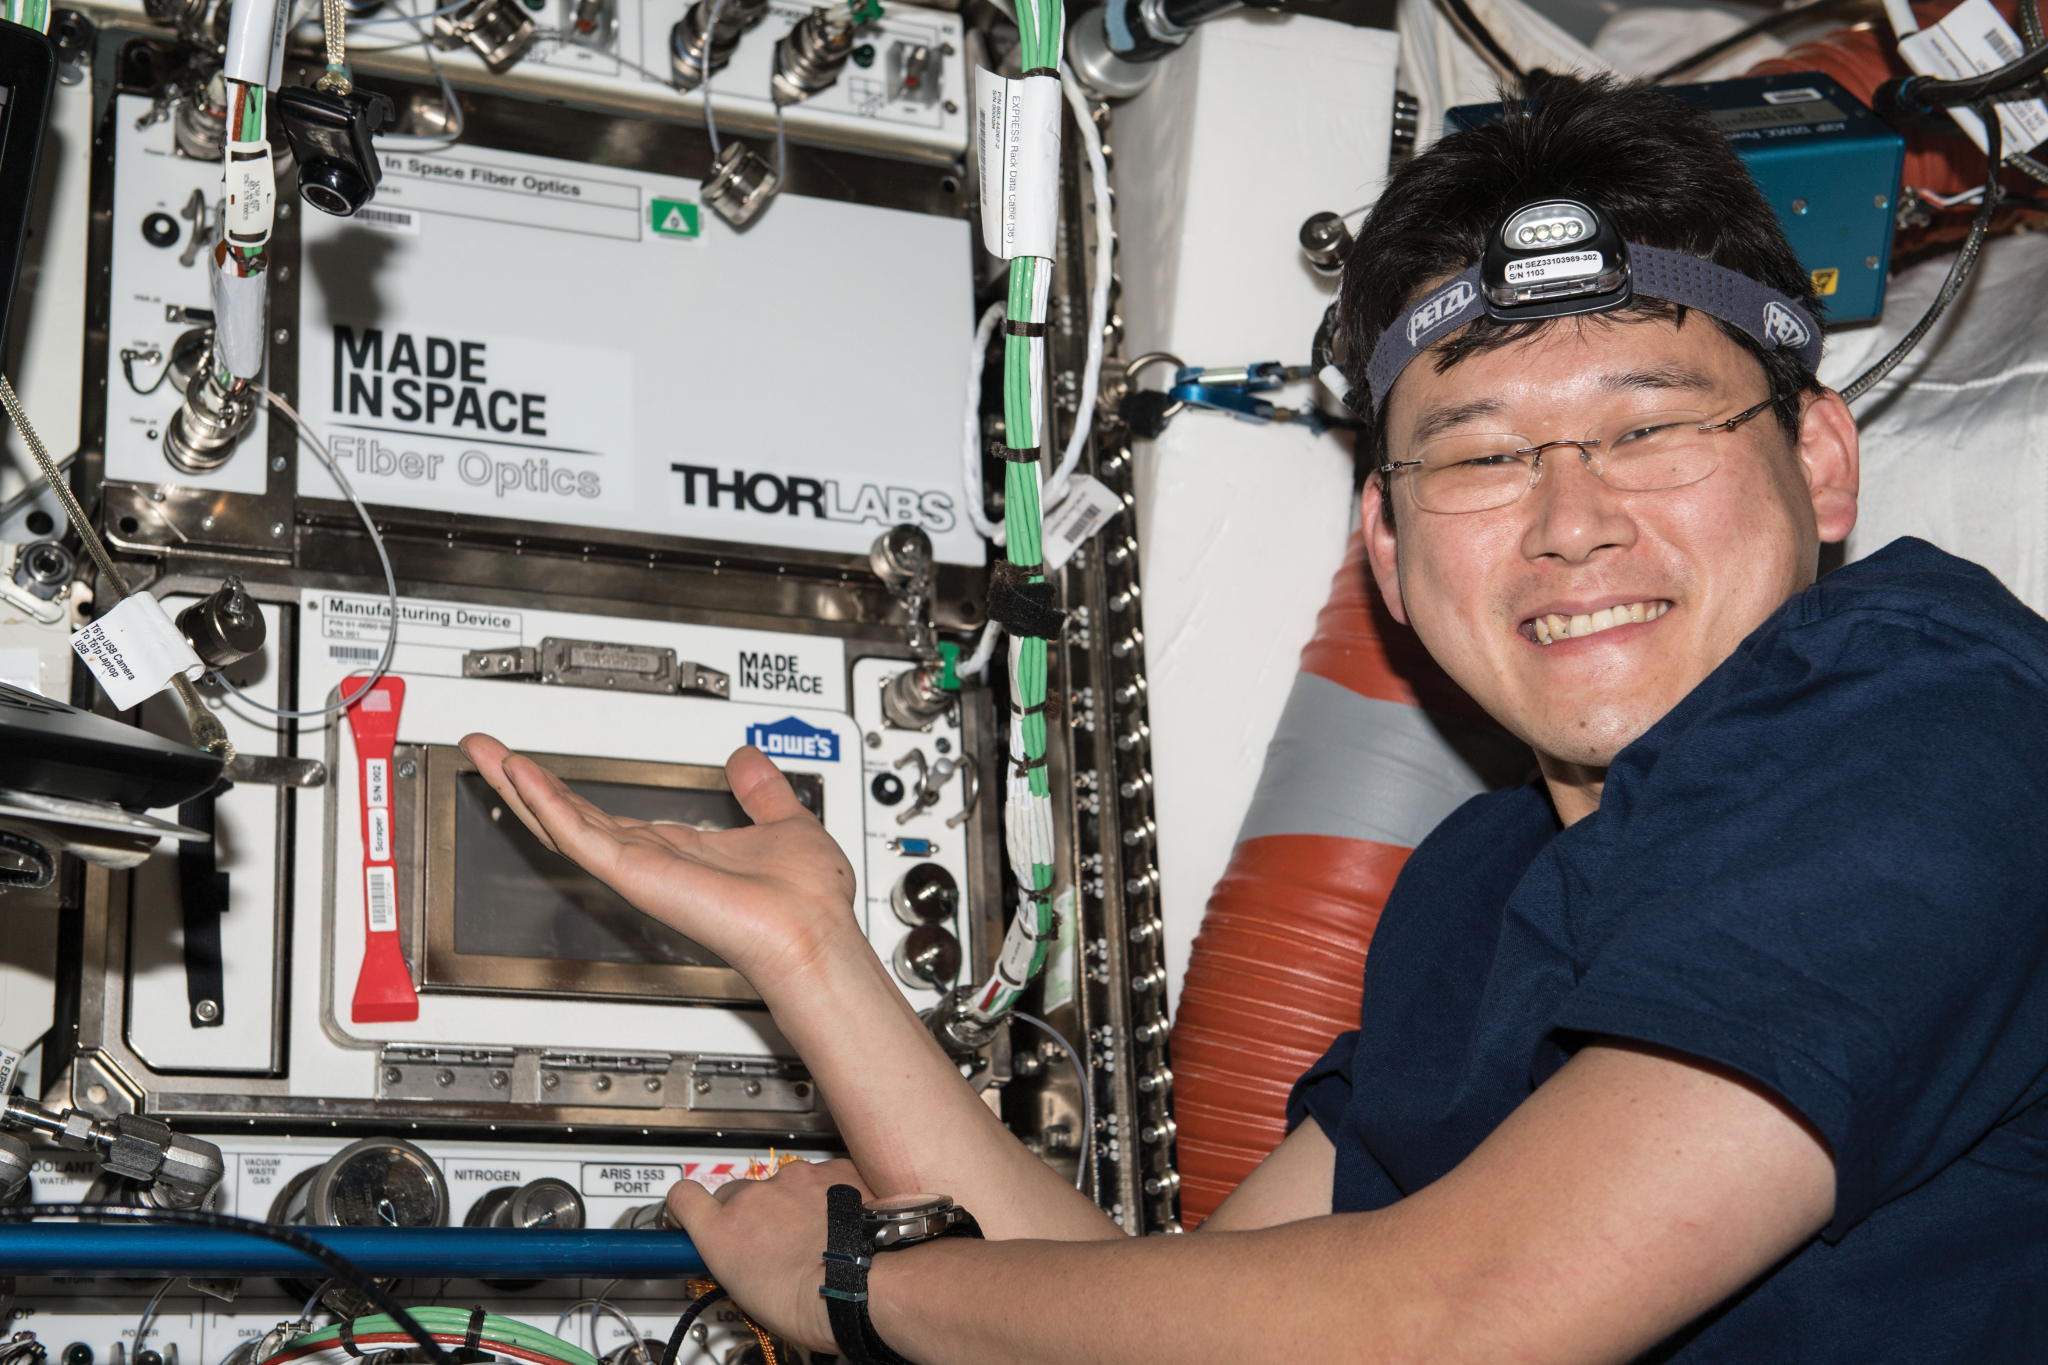 Kanai wears a dark blue short-sleeved t-shirt, a wristwatch, and a headlamp. He is smiling at the camera and gesturing toward hardware that has two microwave oven-sized sections, one above the other. The top one is white and is labeled “Made in Space Fiber Optics” and the other has a clear door and a large red handle. There are multiple cables and connectors around the hardware.